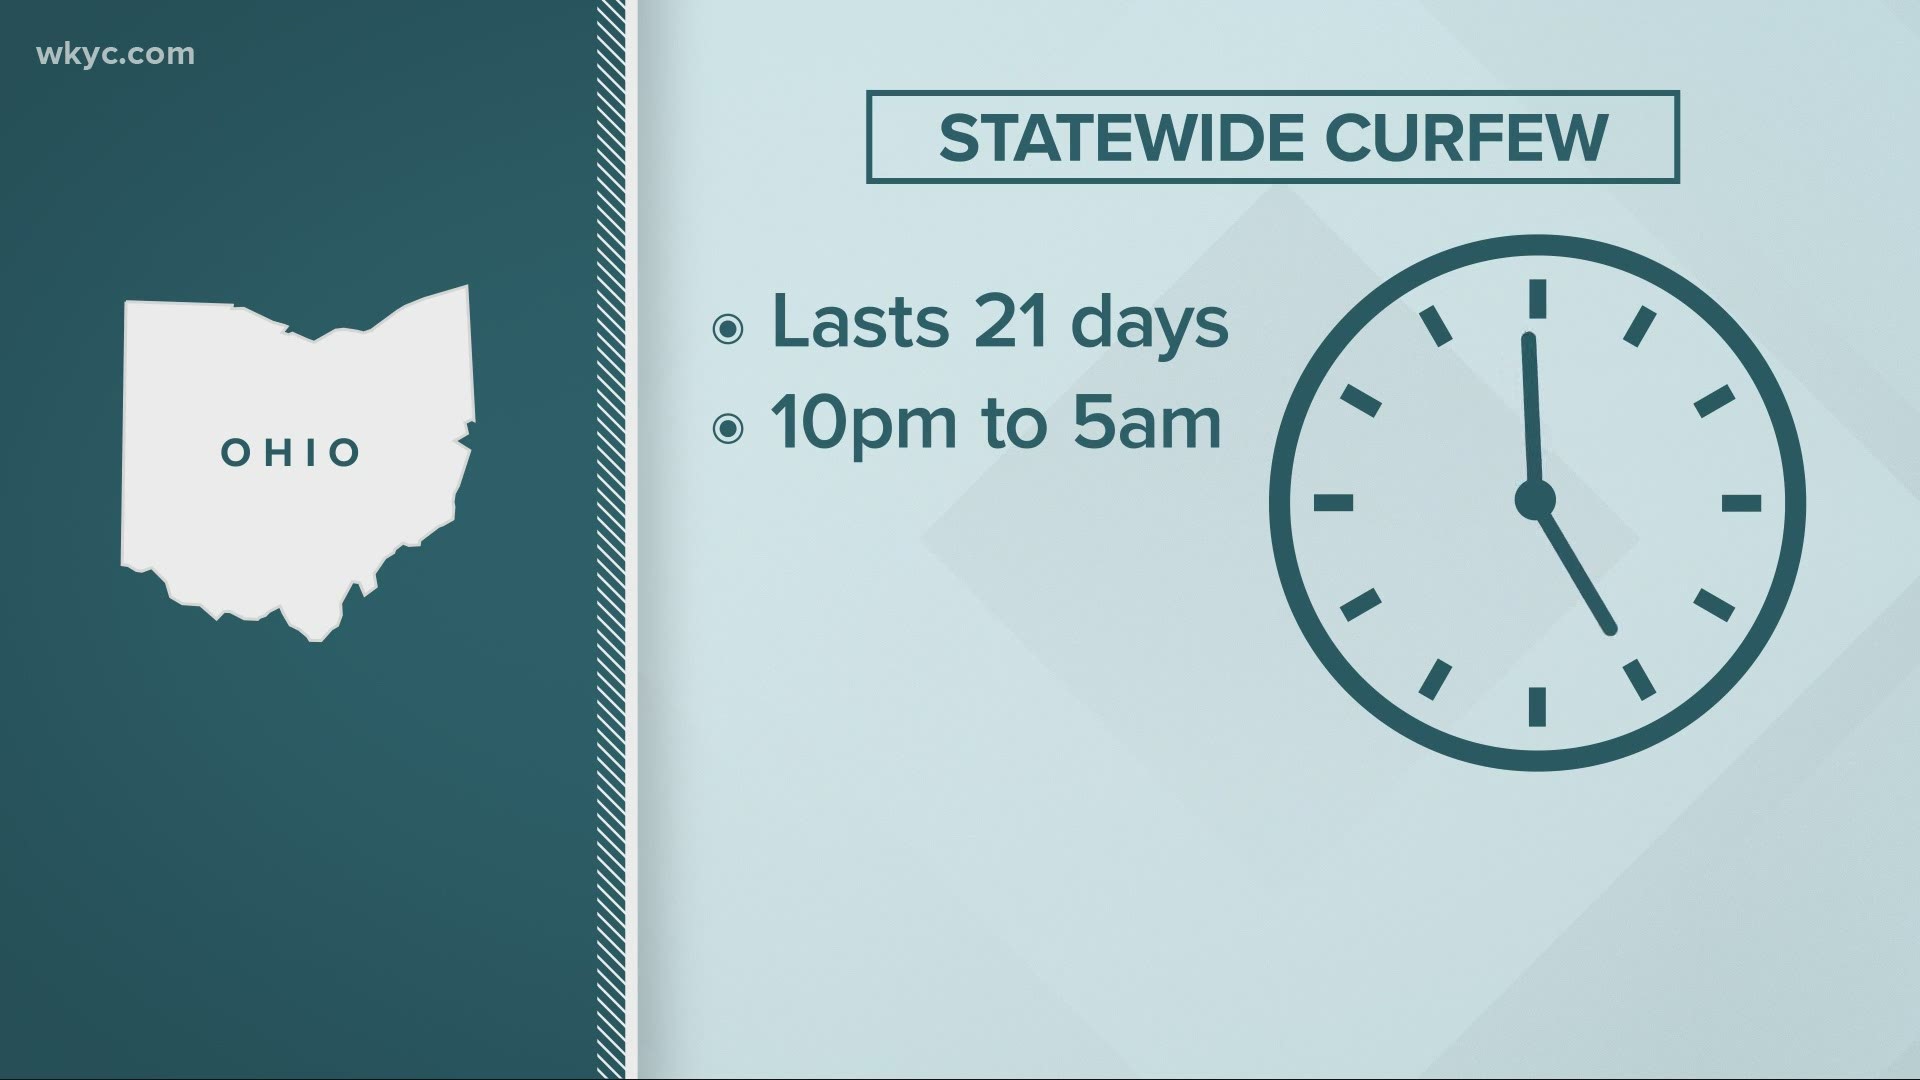 Nov. 18, 2020: How does Ohio's curfew actuallywork? Here are answers to your questions.